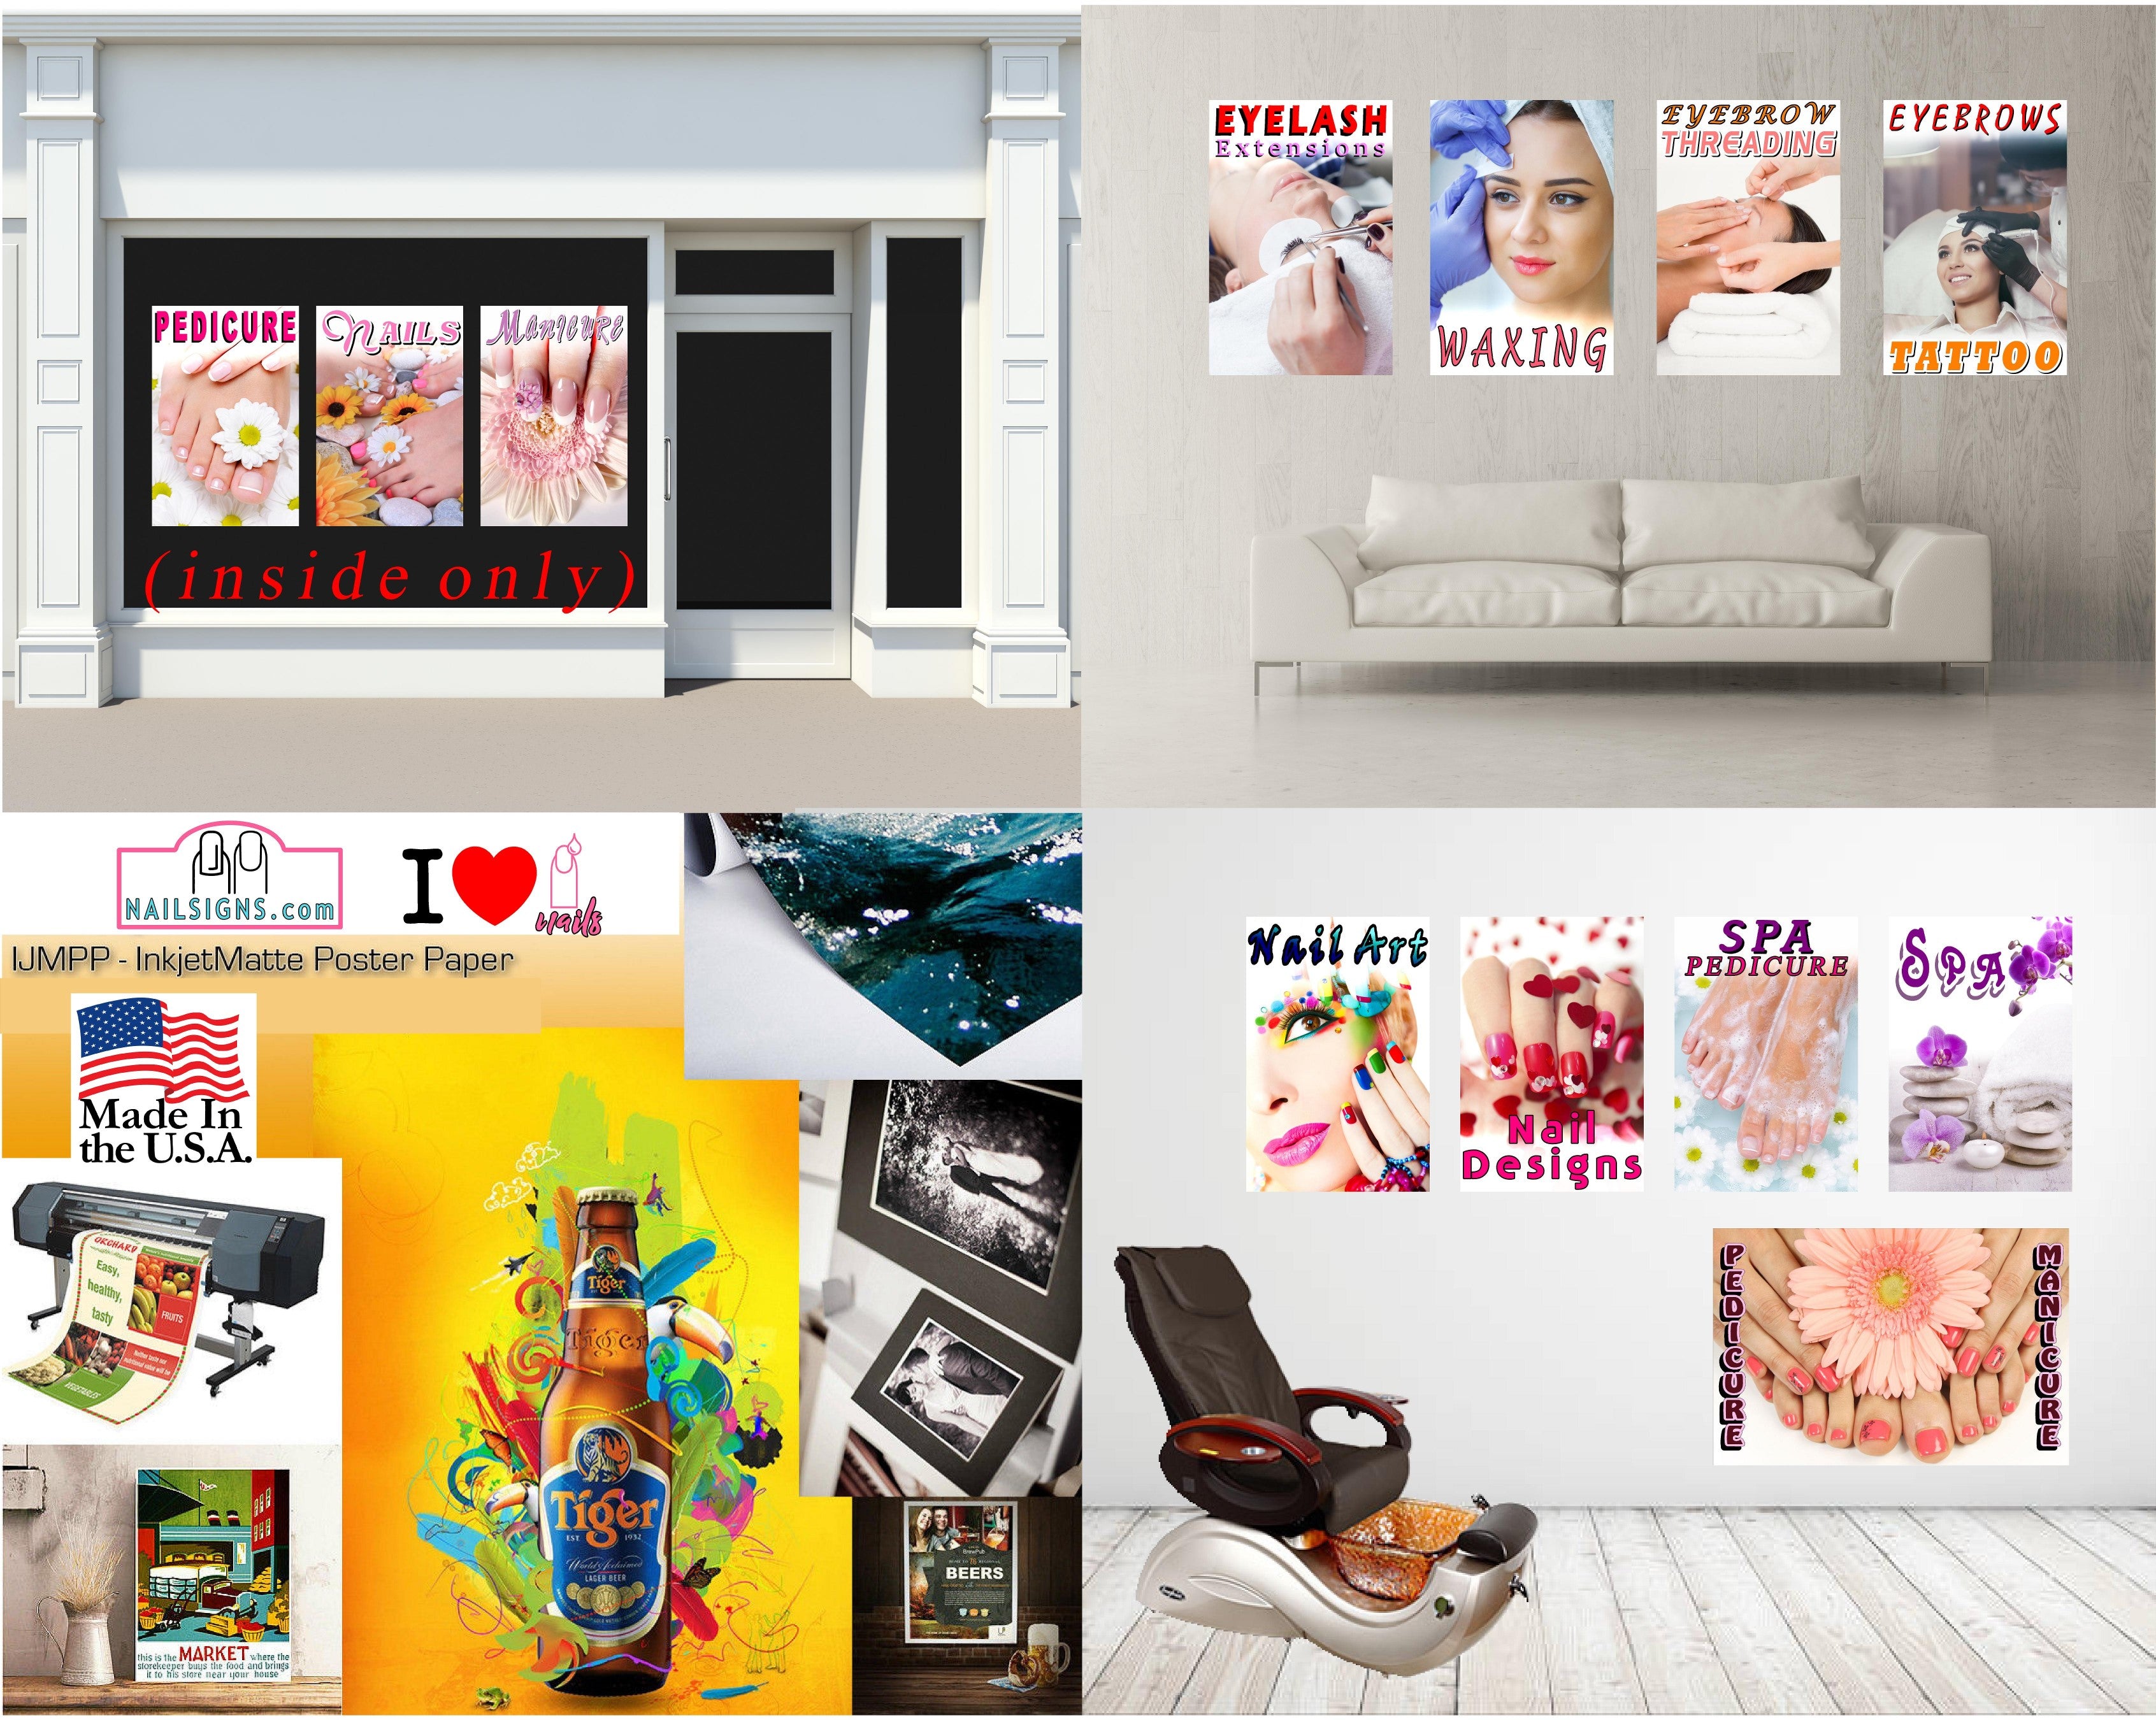 Spa 06 Vertical Photo-Realistic Paper Poster Premium Interior Inside Sign Adverting Marketing Wall Window Non-Laminated